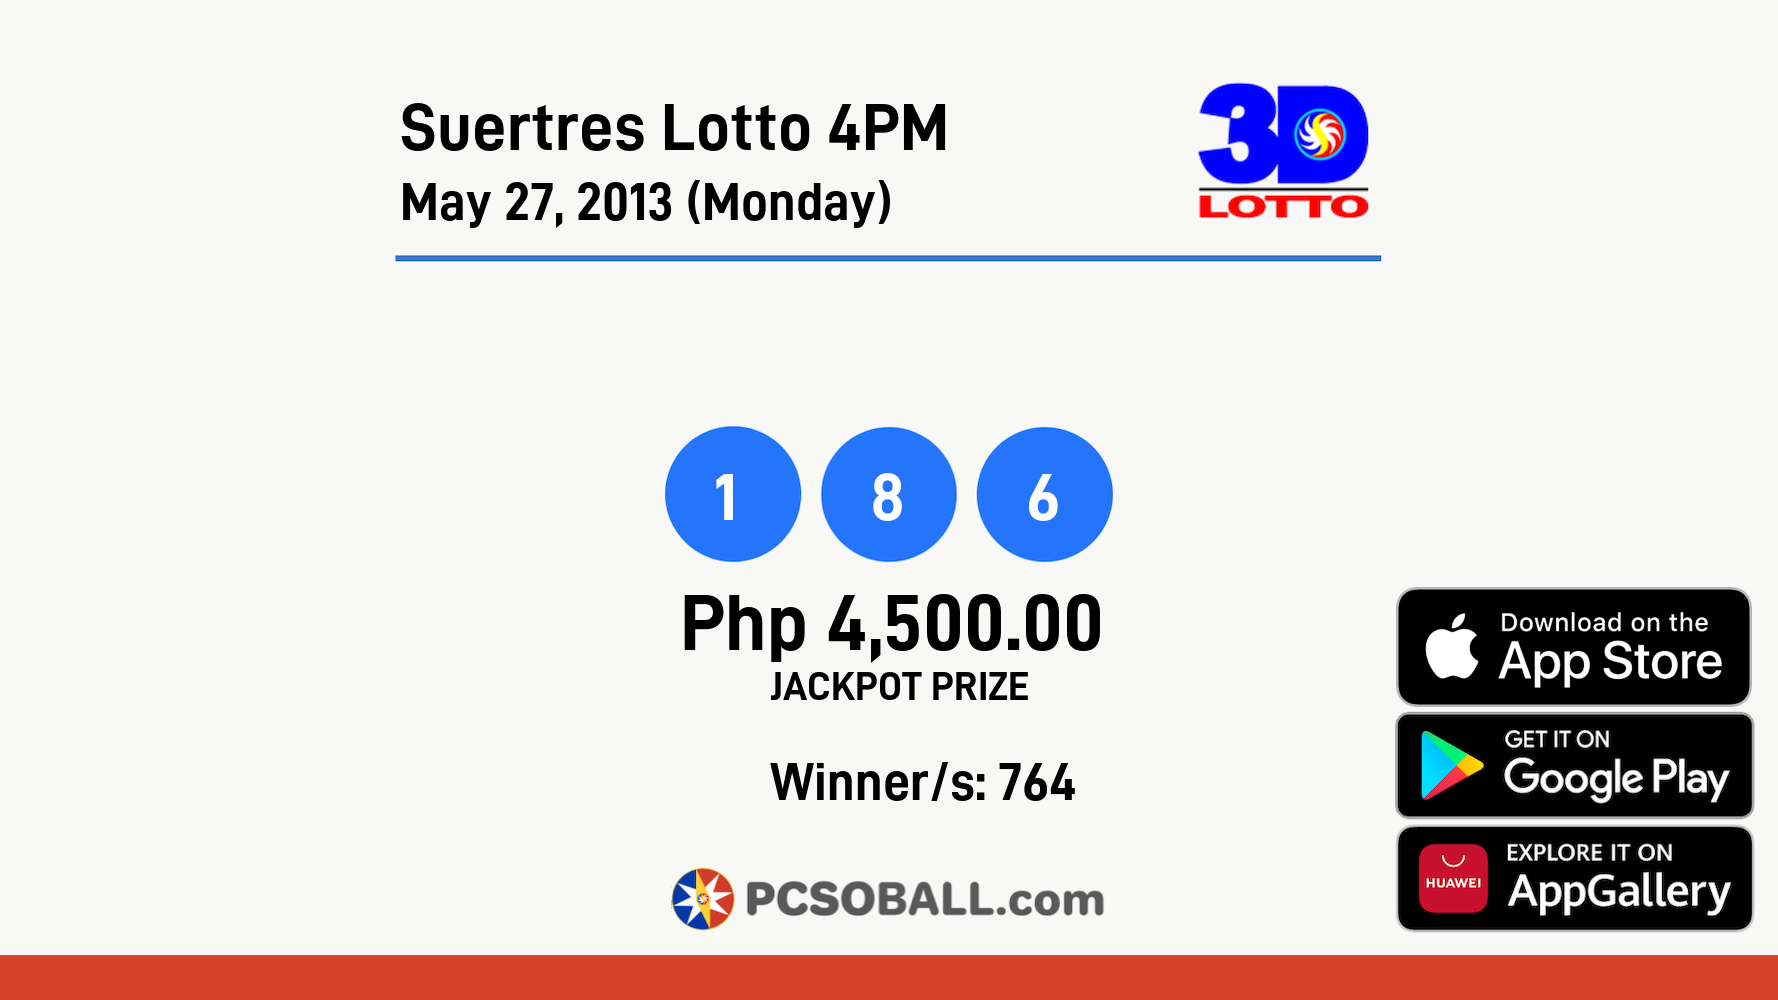 Suertres Lotto 4PM May 27, 2013 (Monday) Result